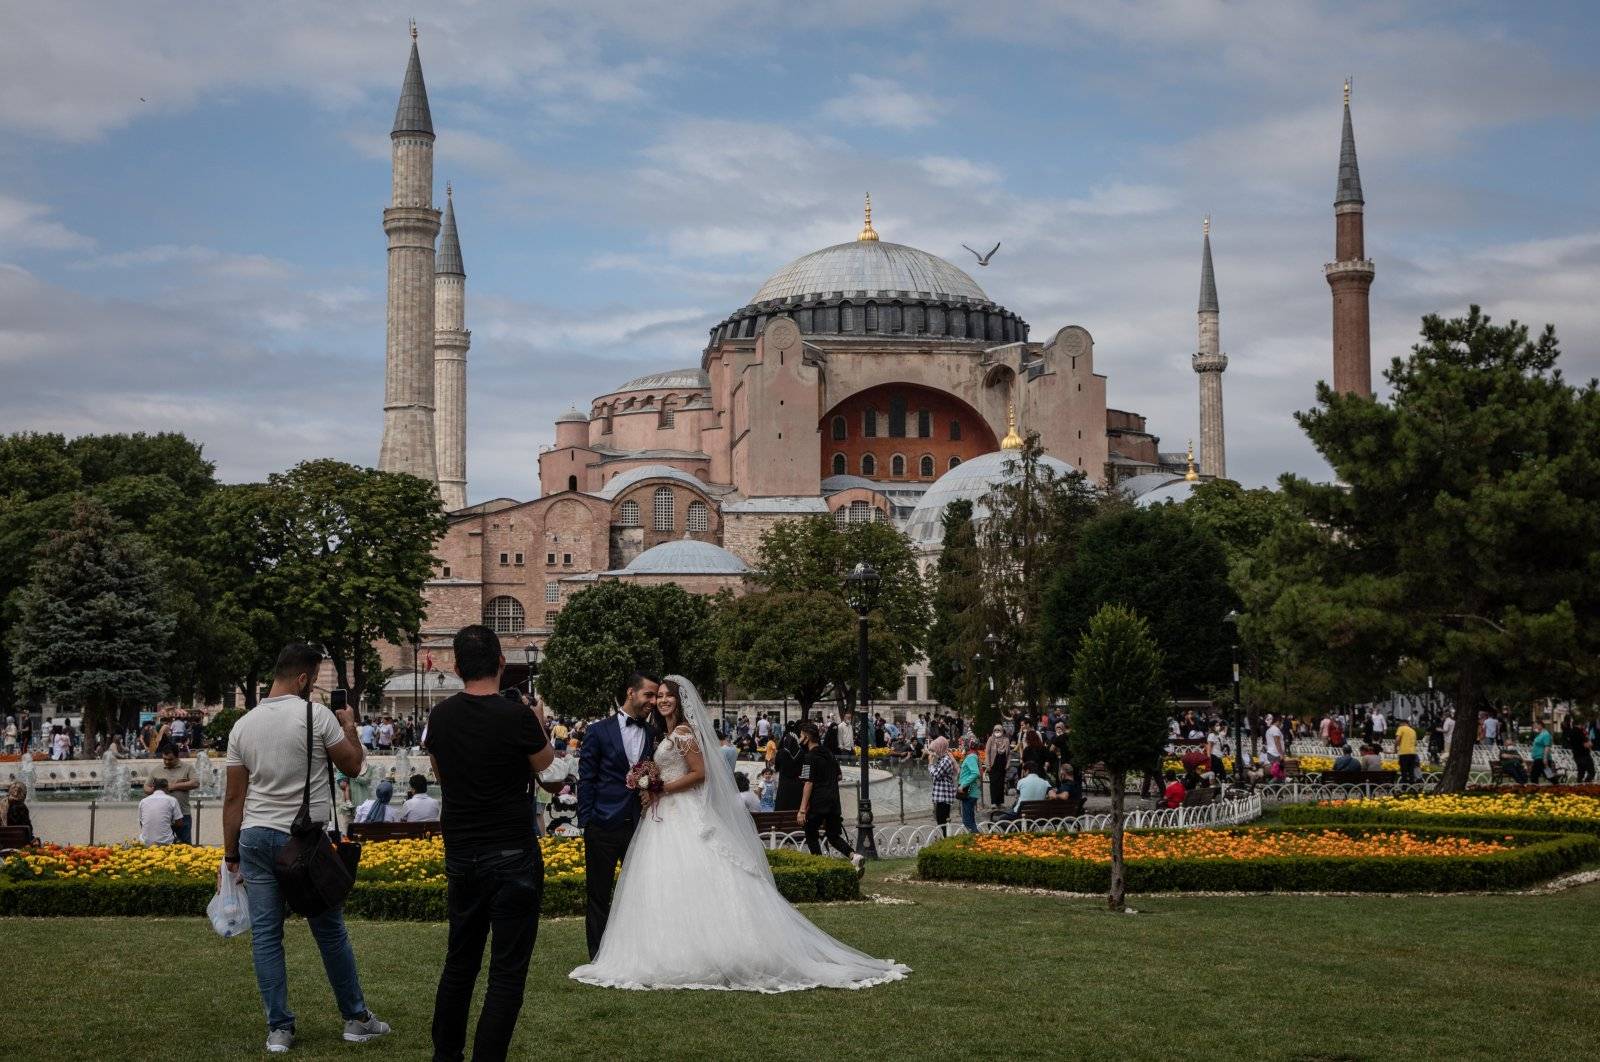 Turkish Wedding Customs and Superstitions You Didn’t Know